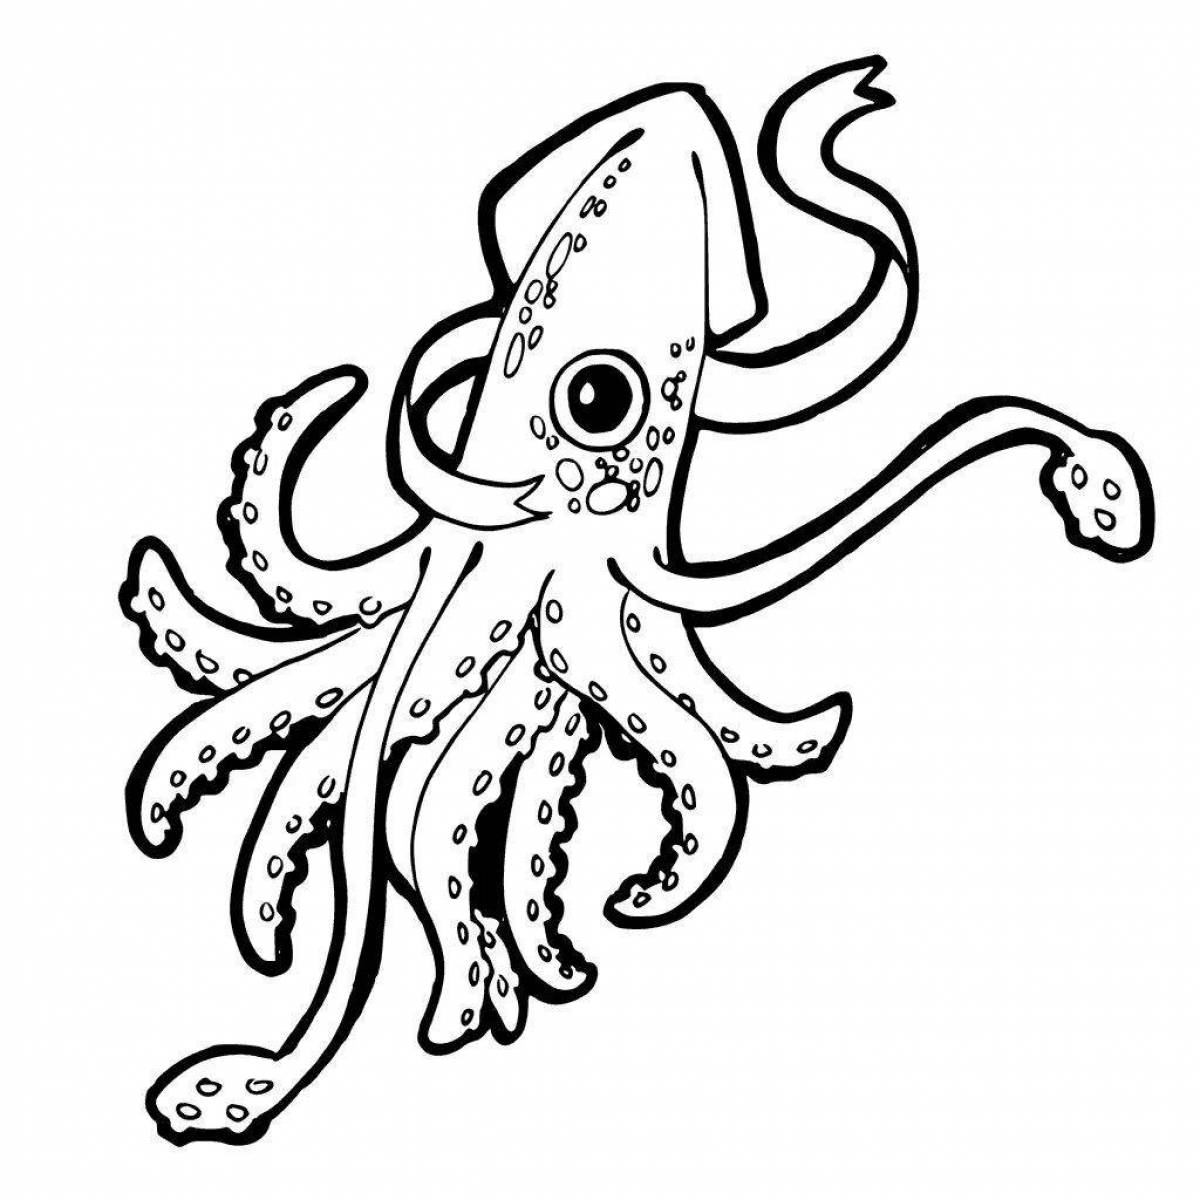 Amazing squid doll coloring page